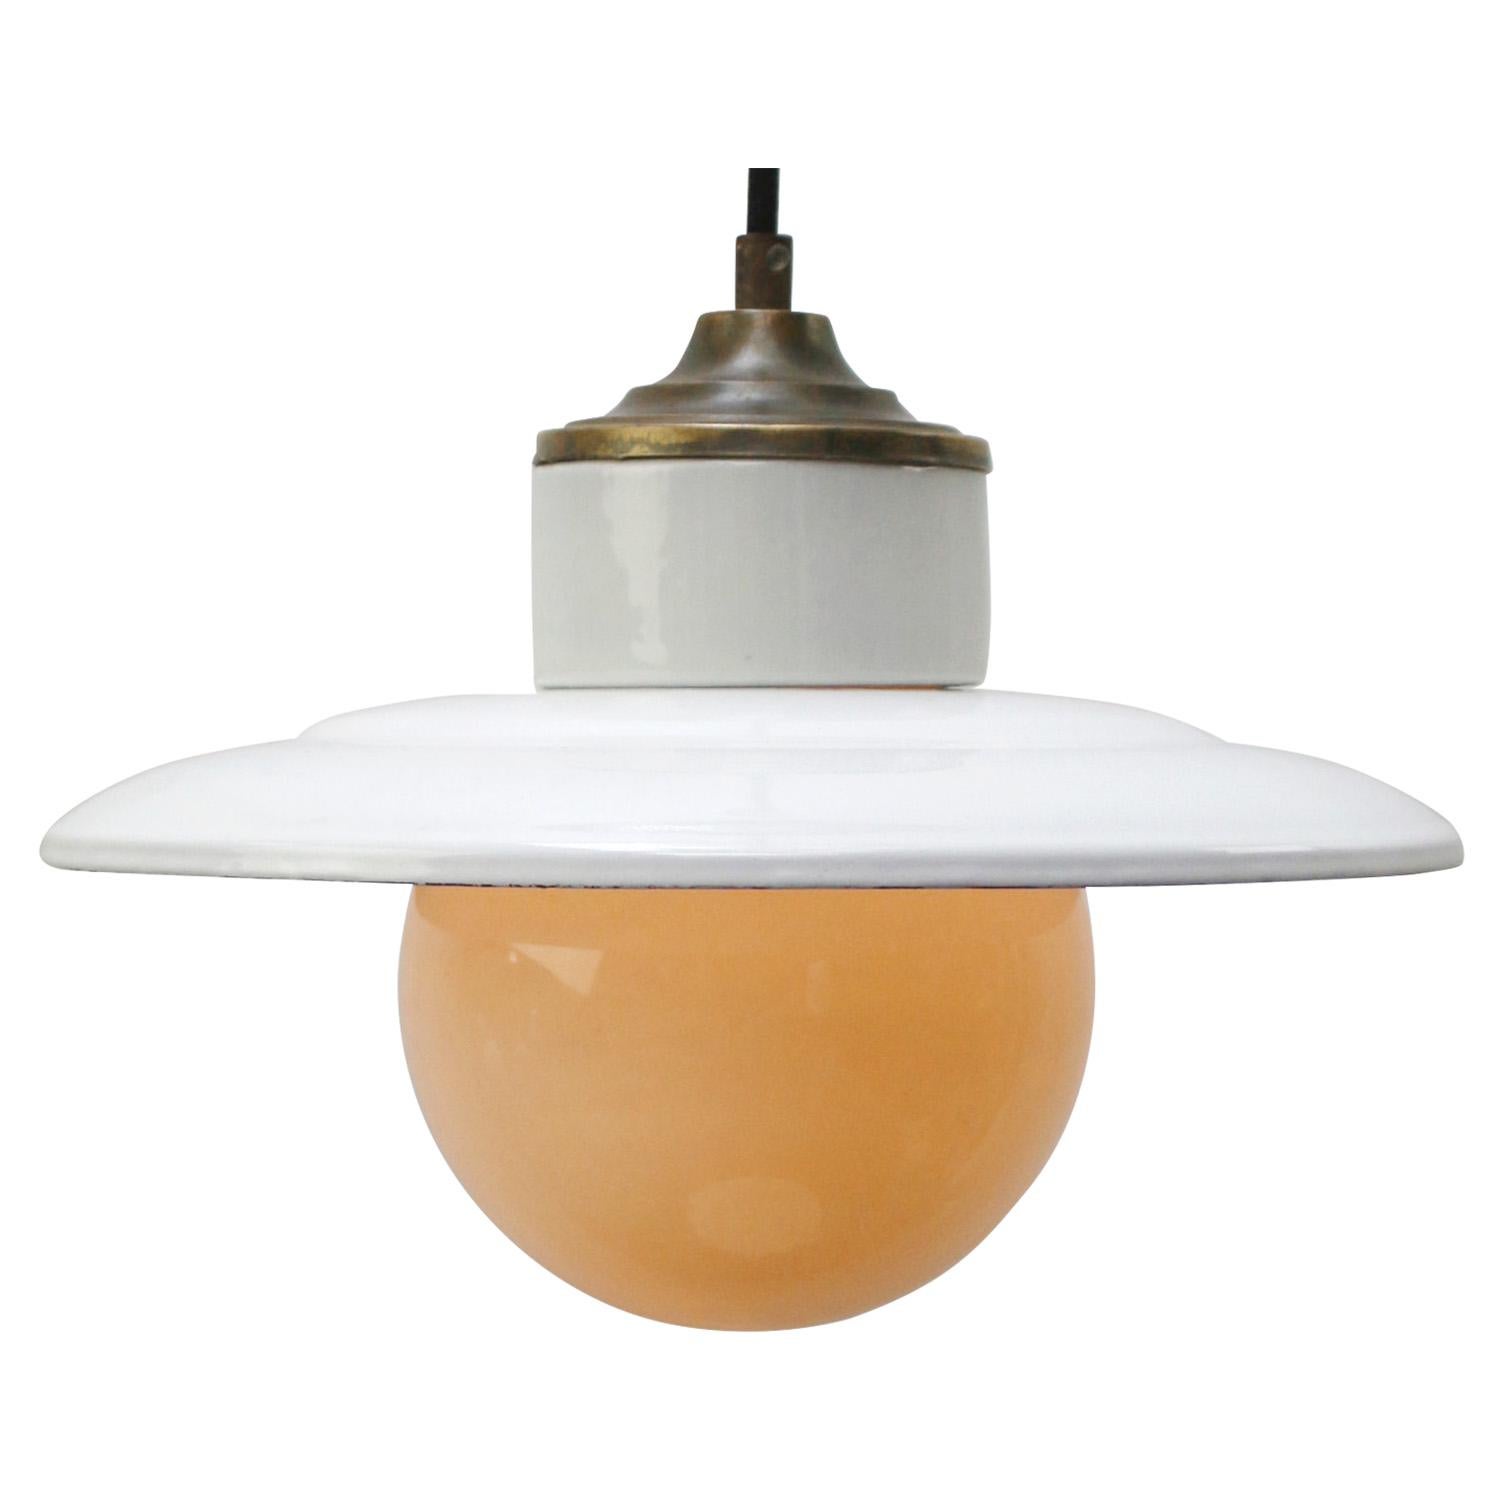 Porcelain industrial hanging lamp.
White porcelain, brass and white opaline milk glass.
White enamel shade
2 conductors, no ground.

Weight: 1.70 kg / 3.7 lb

Priced per individual item. All lamps have been made suitable by international standards